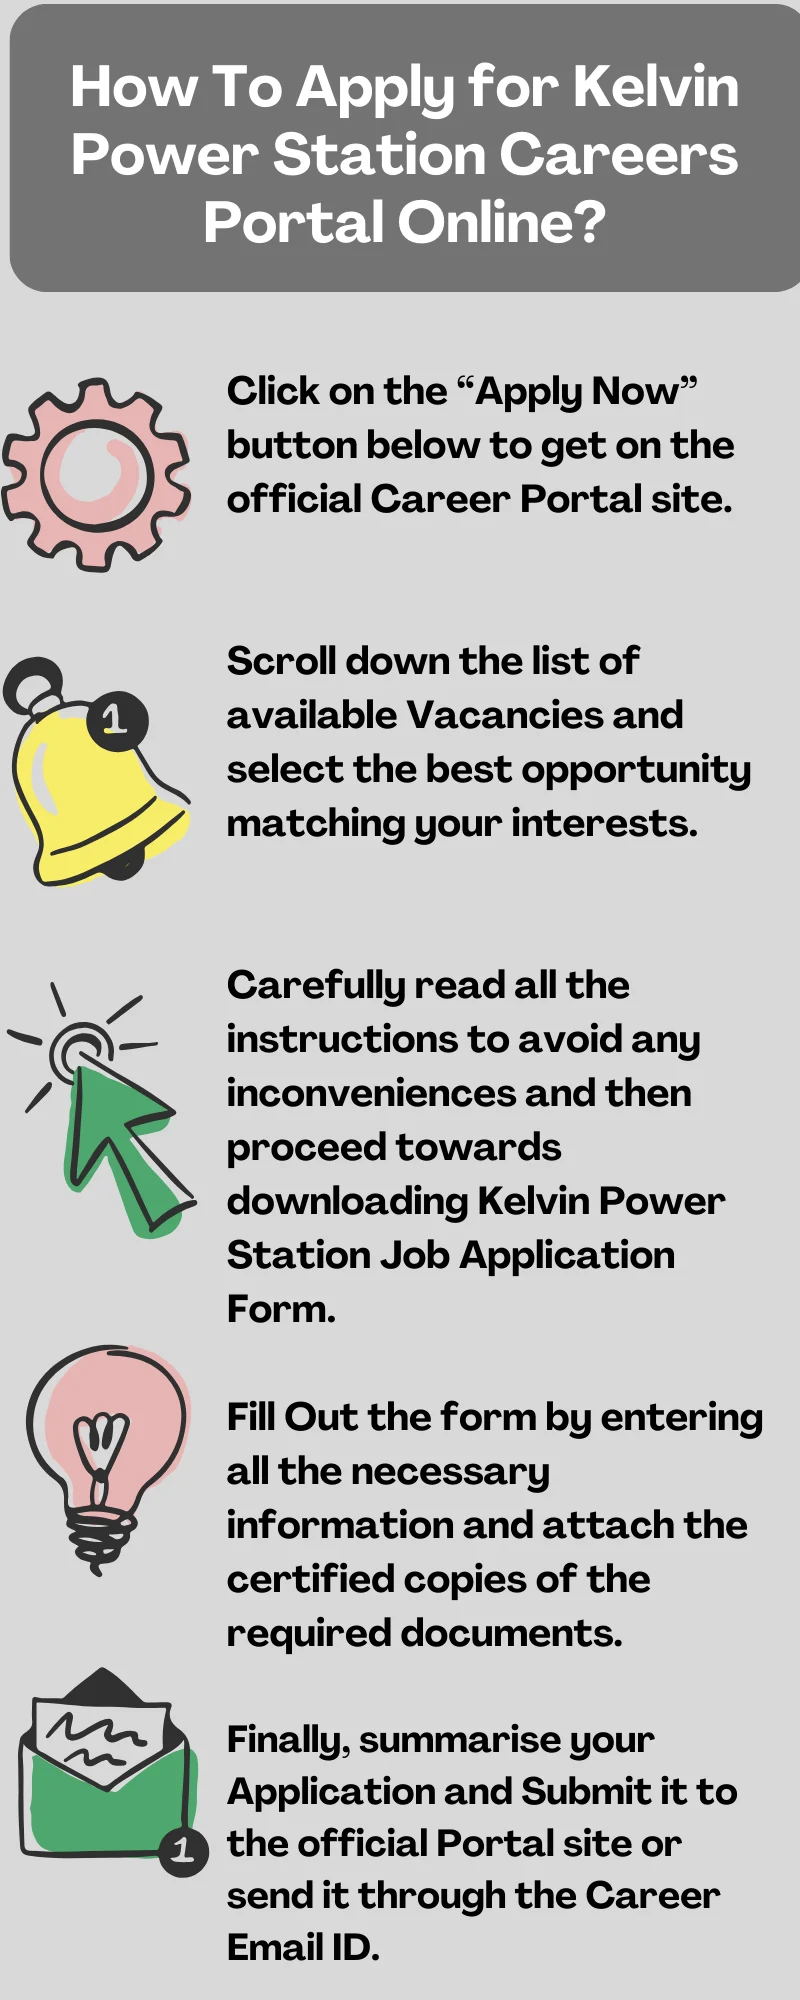 How To Apply for Kelvin Power Station Careers Portal Online?